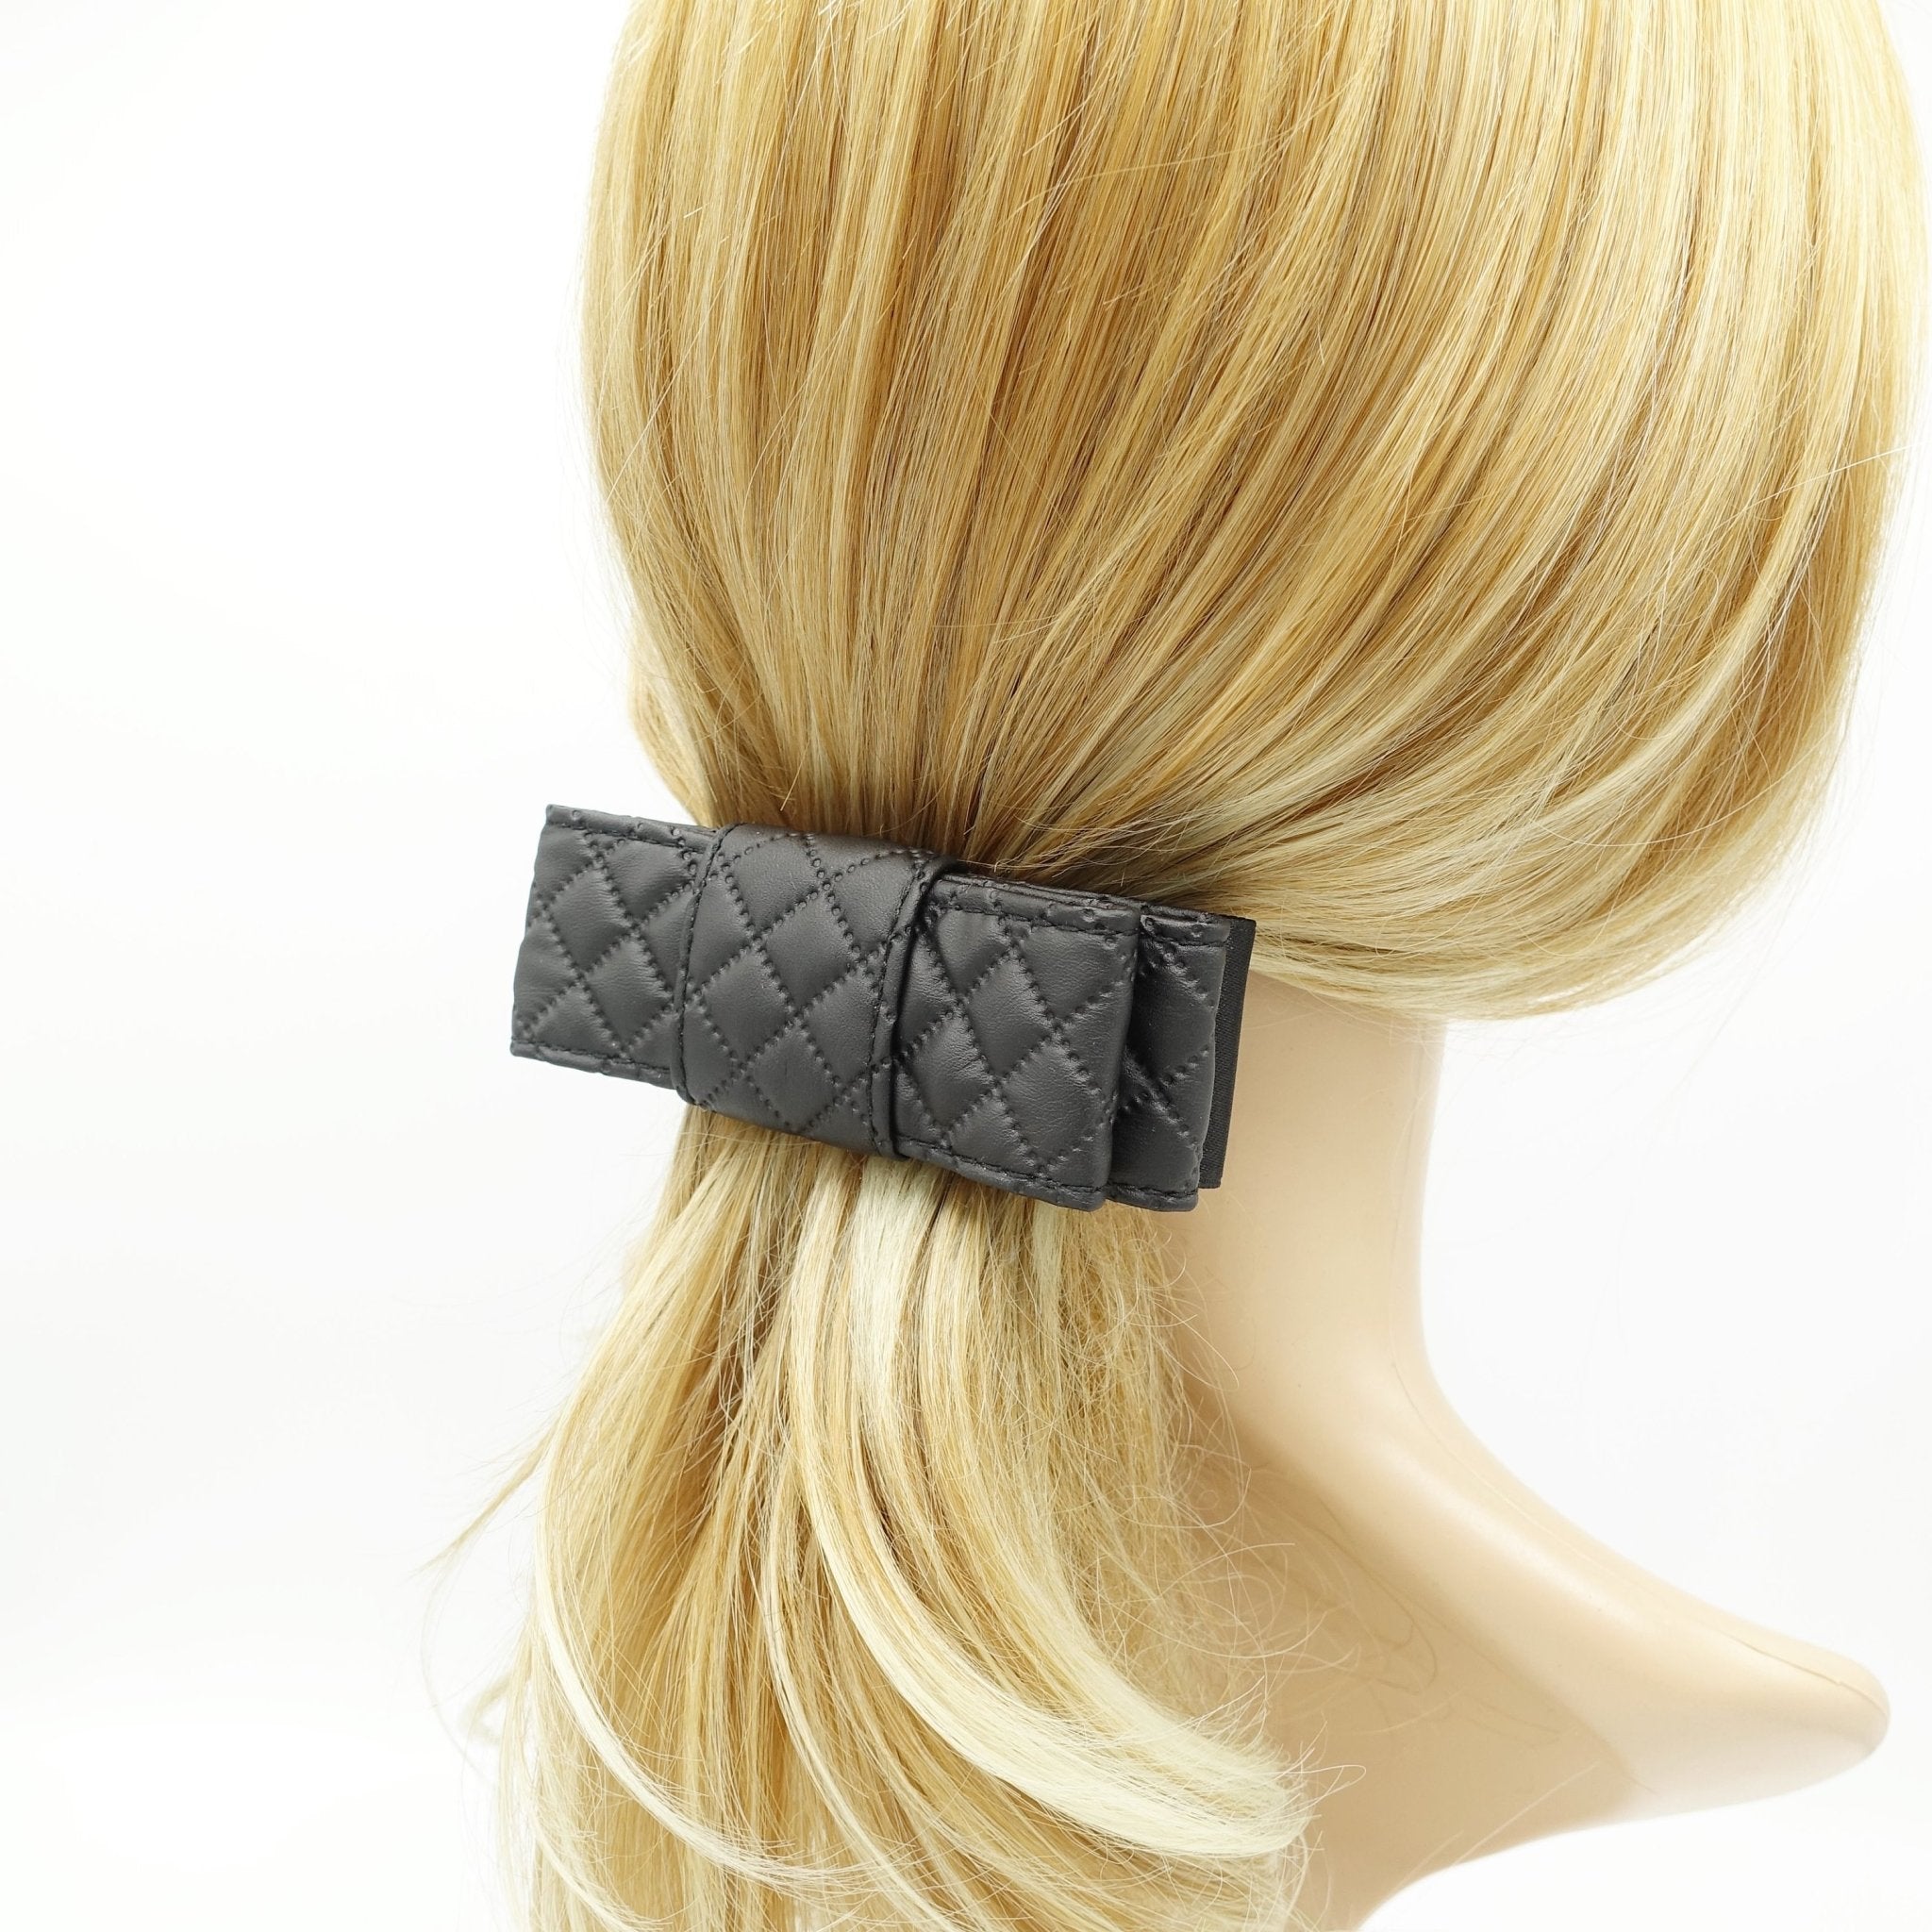 VeryShine quilted hair bow faux leather layered flat style bow for women